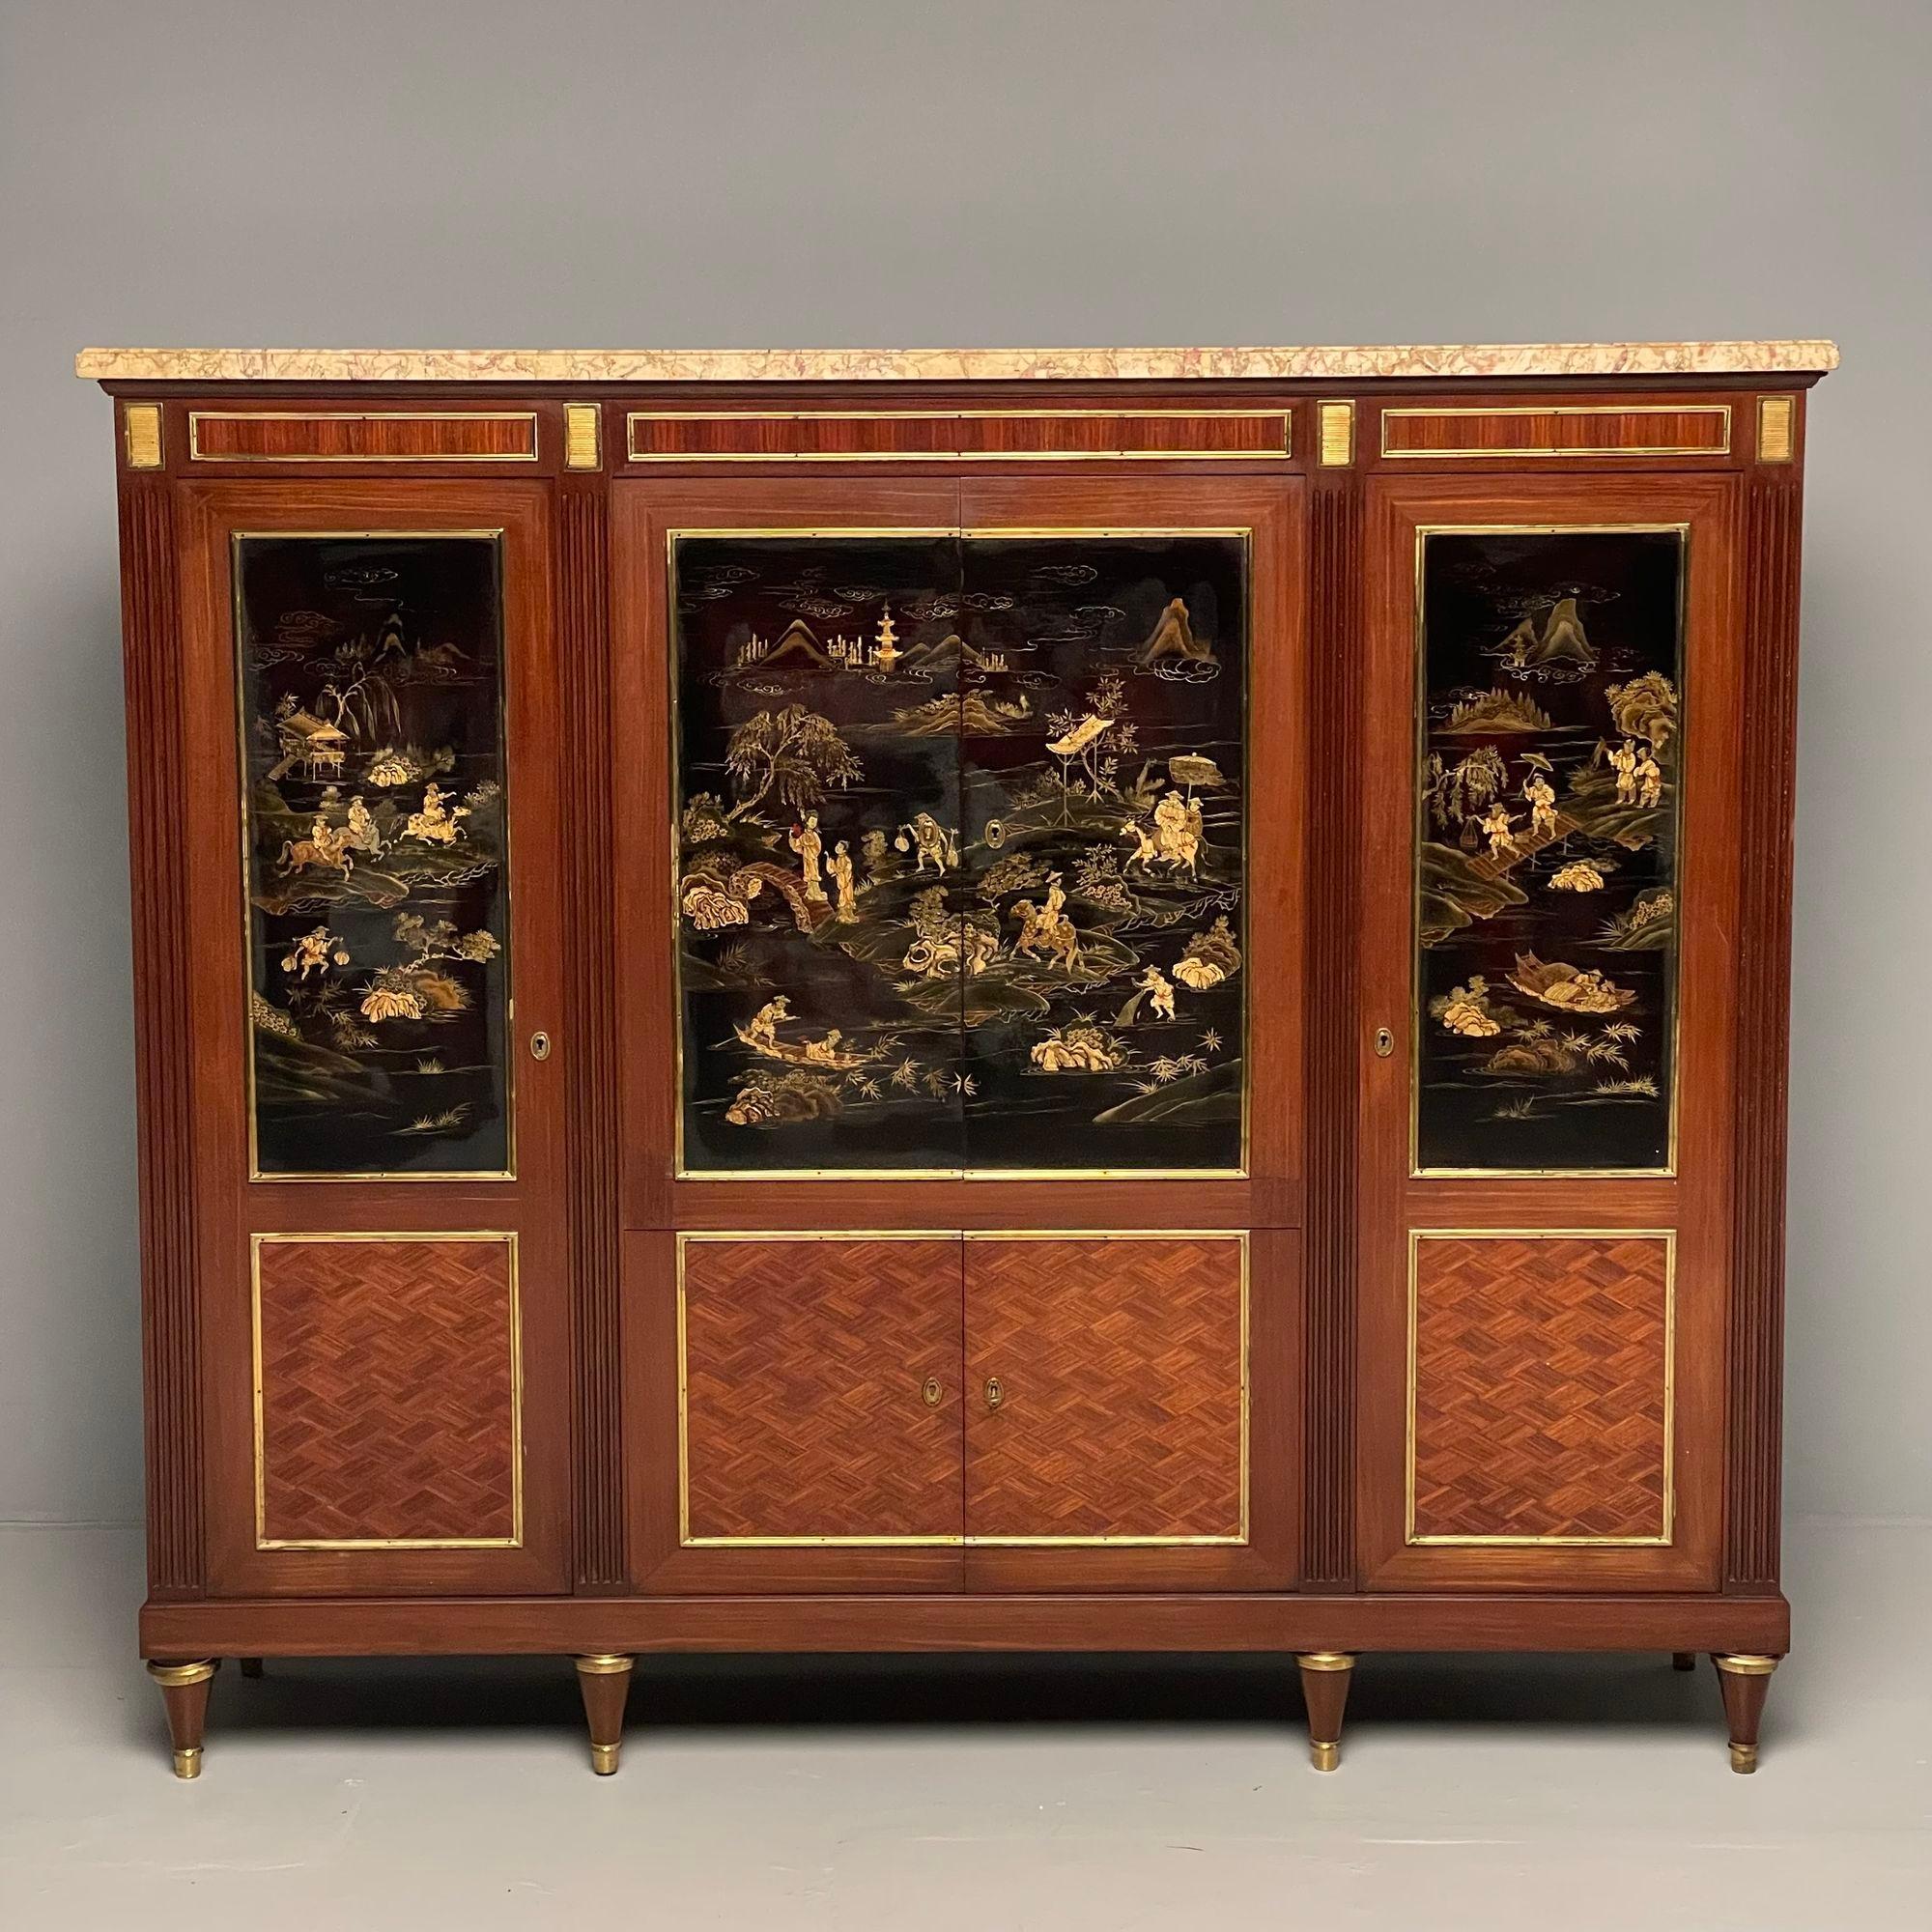 Louis XVI Chinoiserie Dry Bar, Bookcase Cabinet in Fashion of Maison Jansen

A large and impressive French Louis XVI style marble-top mahogany sideboard, in the manner of Maison Jensen, early 20th c., parquetry case, four cabinet doors with